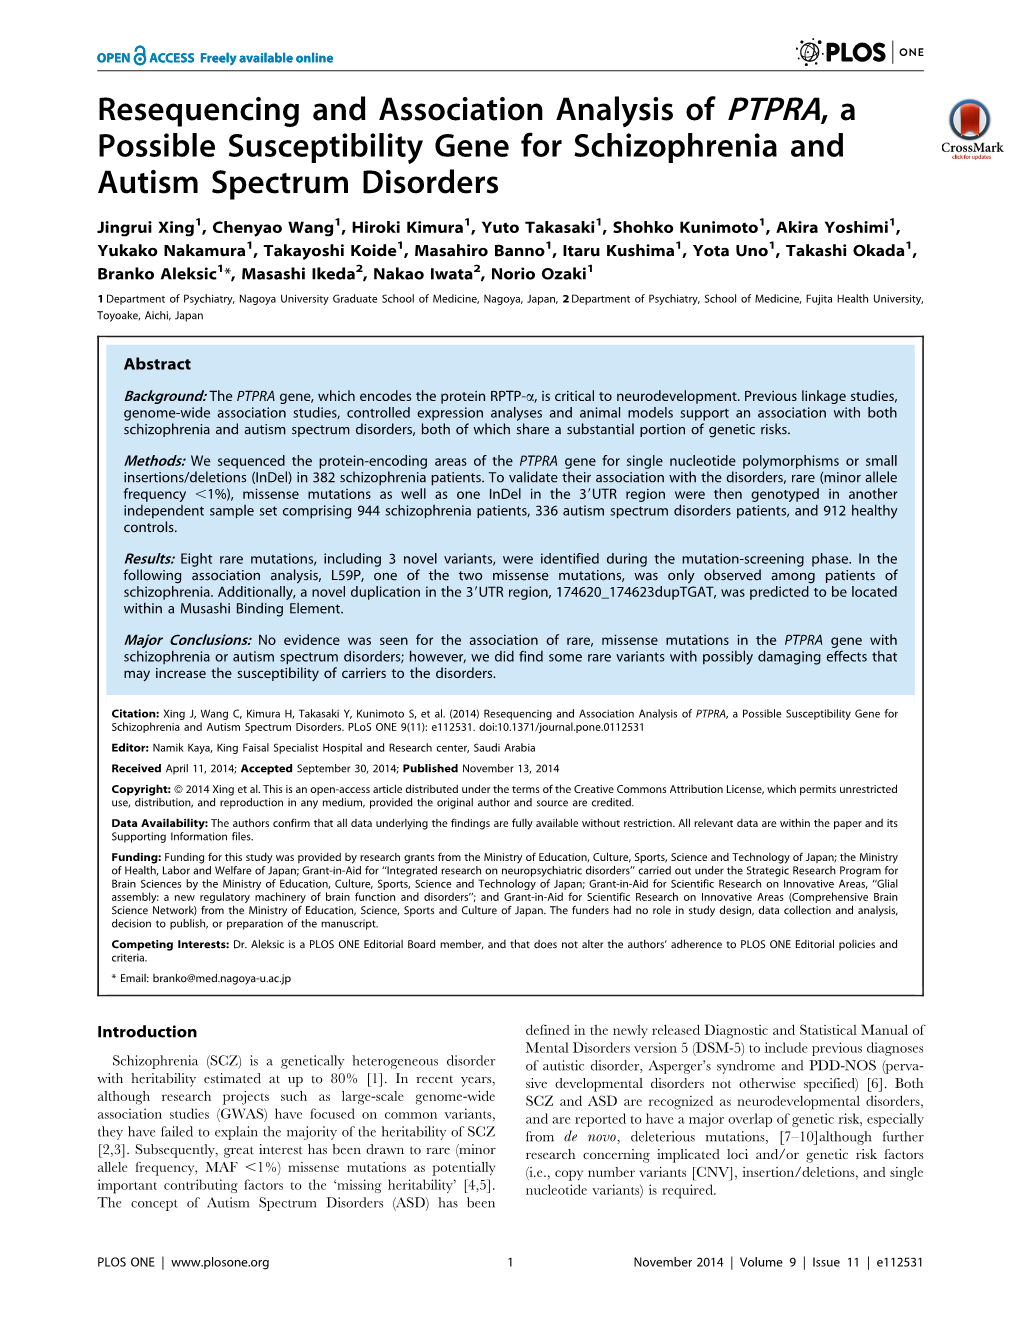 Resequencing and Association Analysis of PTPRA, a Possible Susceptibility Gene for Schizophrenia and Autism Spectrum Disorders